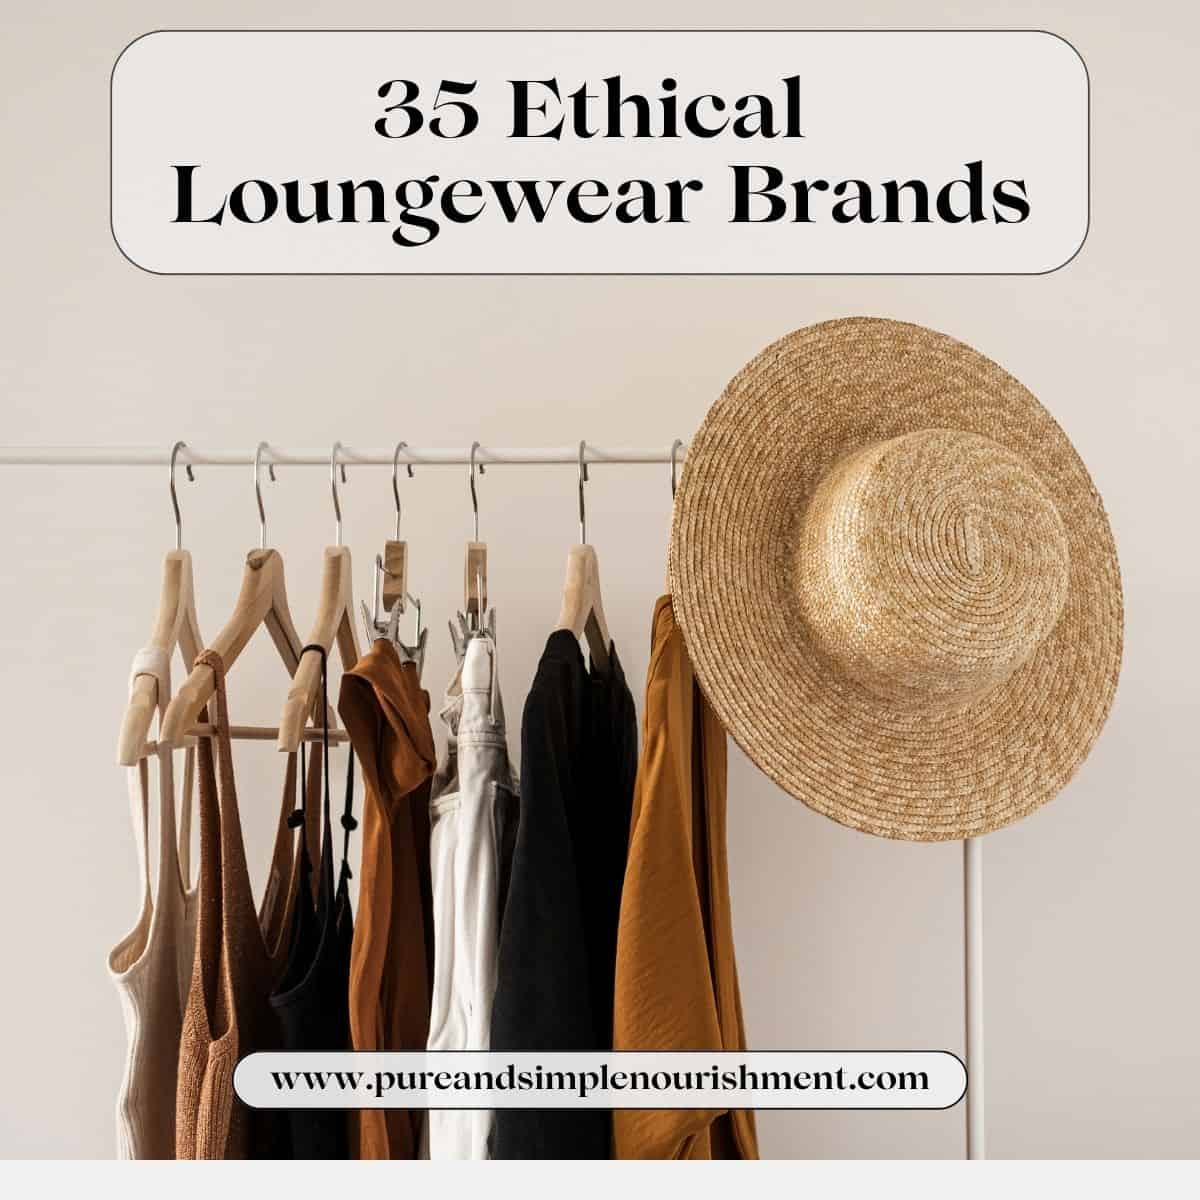 Clothing hanging on a clothes rack with a straw hat at the end of it and the title "35 Ethical Loungewear Brands" over it.